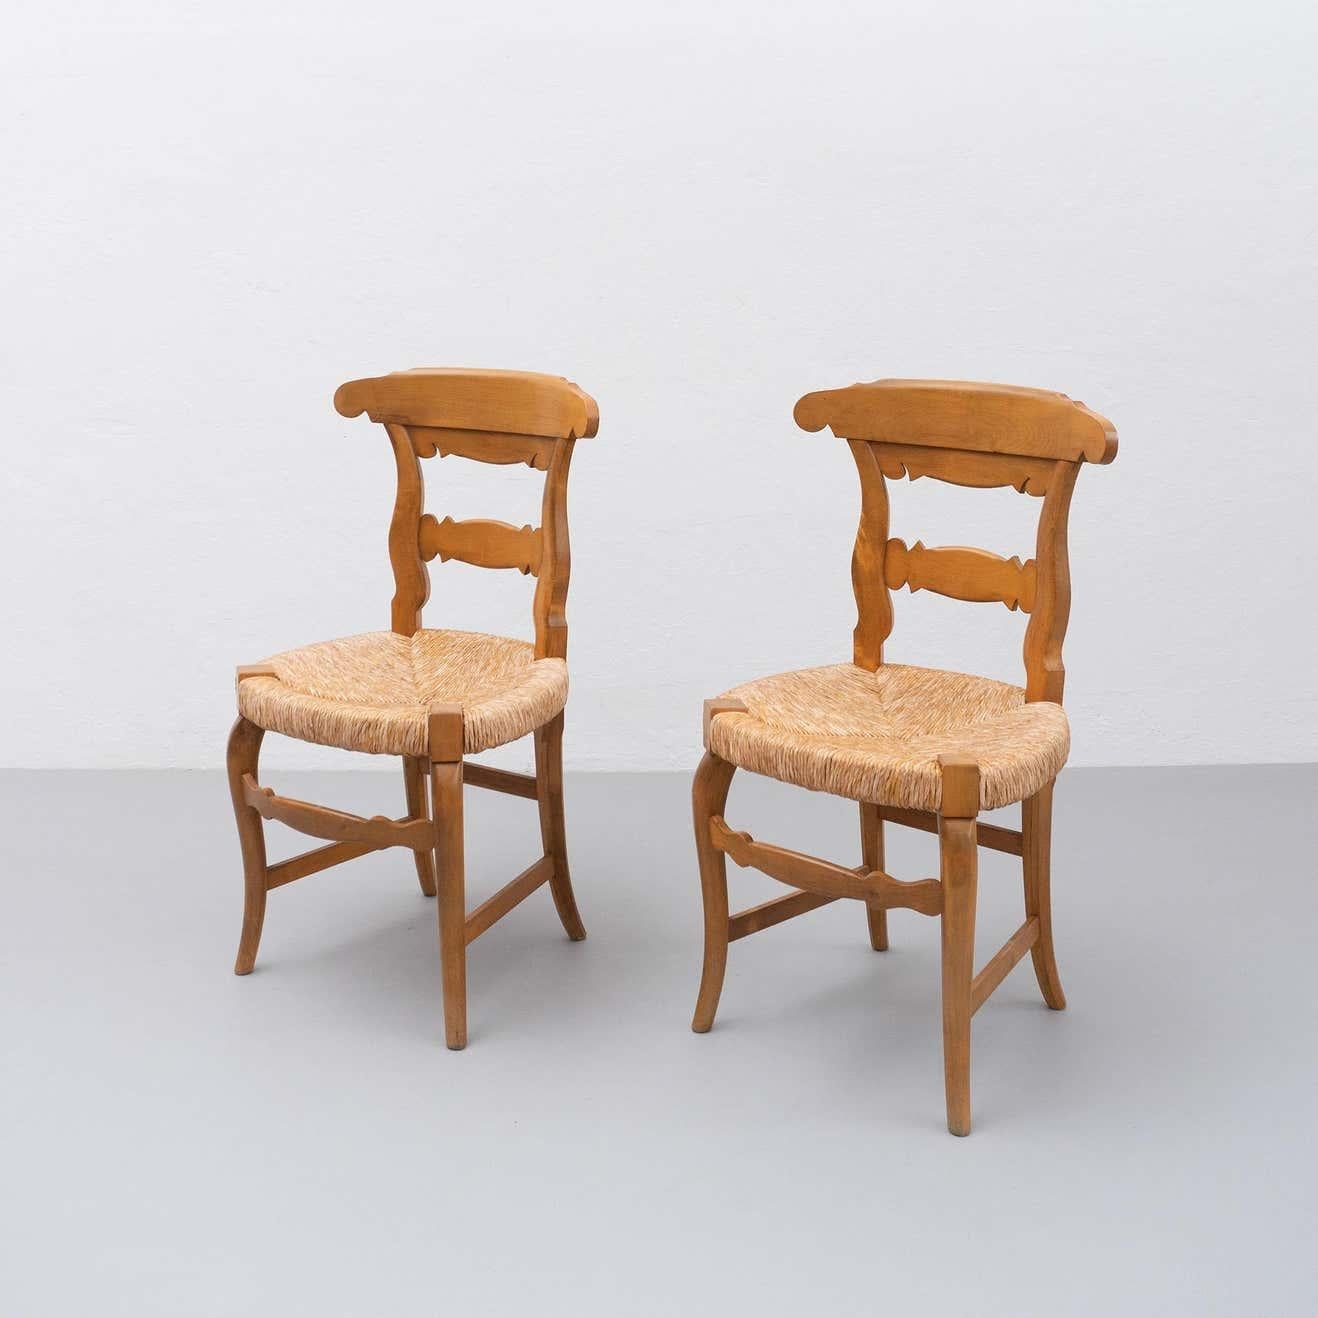 Early 20th century set of two provenzal chairs. Wooden chairs with a traditional rattan seat, curved lines and characteristic details of French Provincial style.

In good original condition, with minor wear consistent with age and use, preserving a